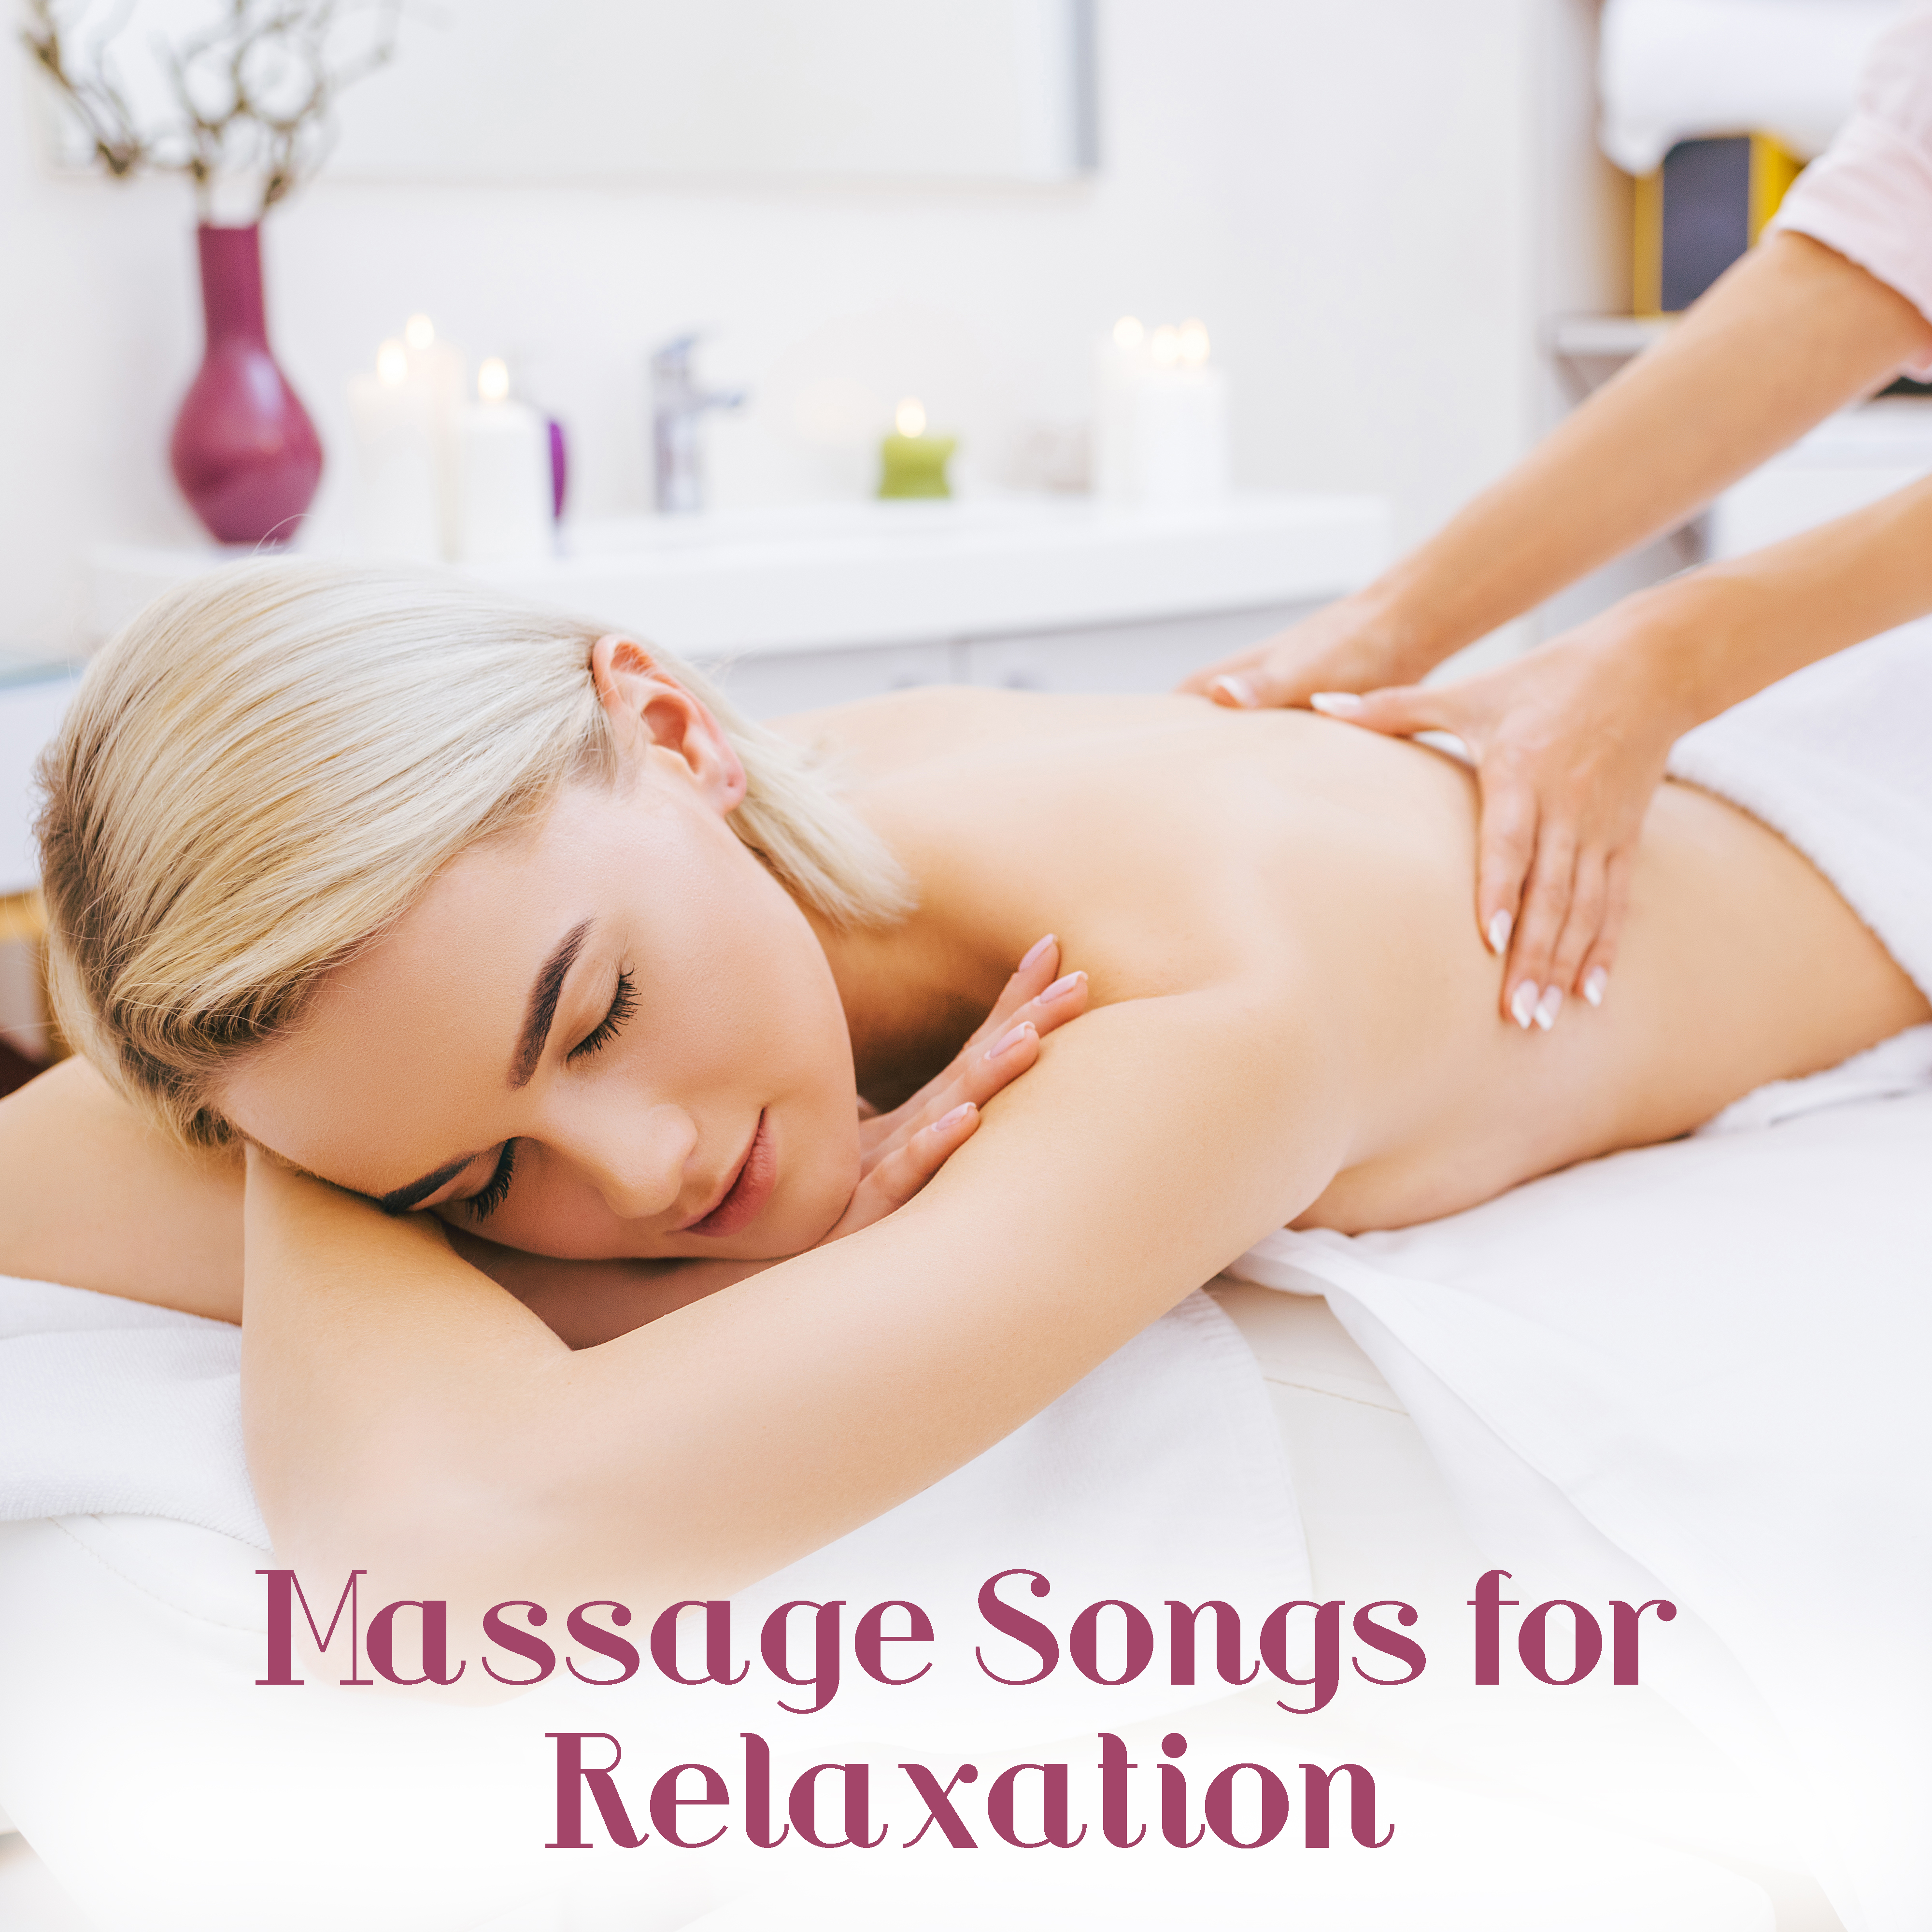 Massage Songs for Relaxation